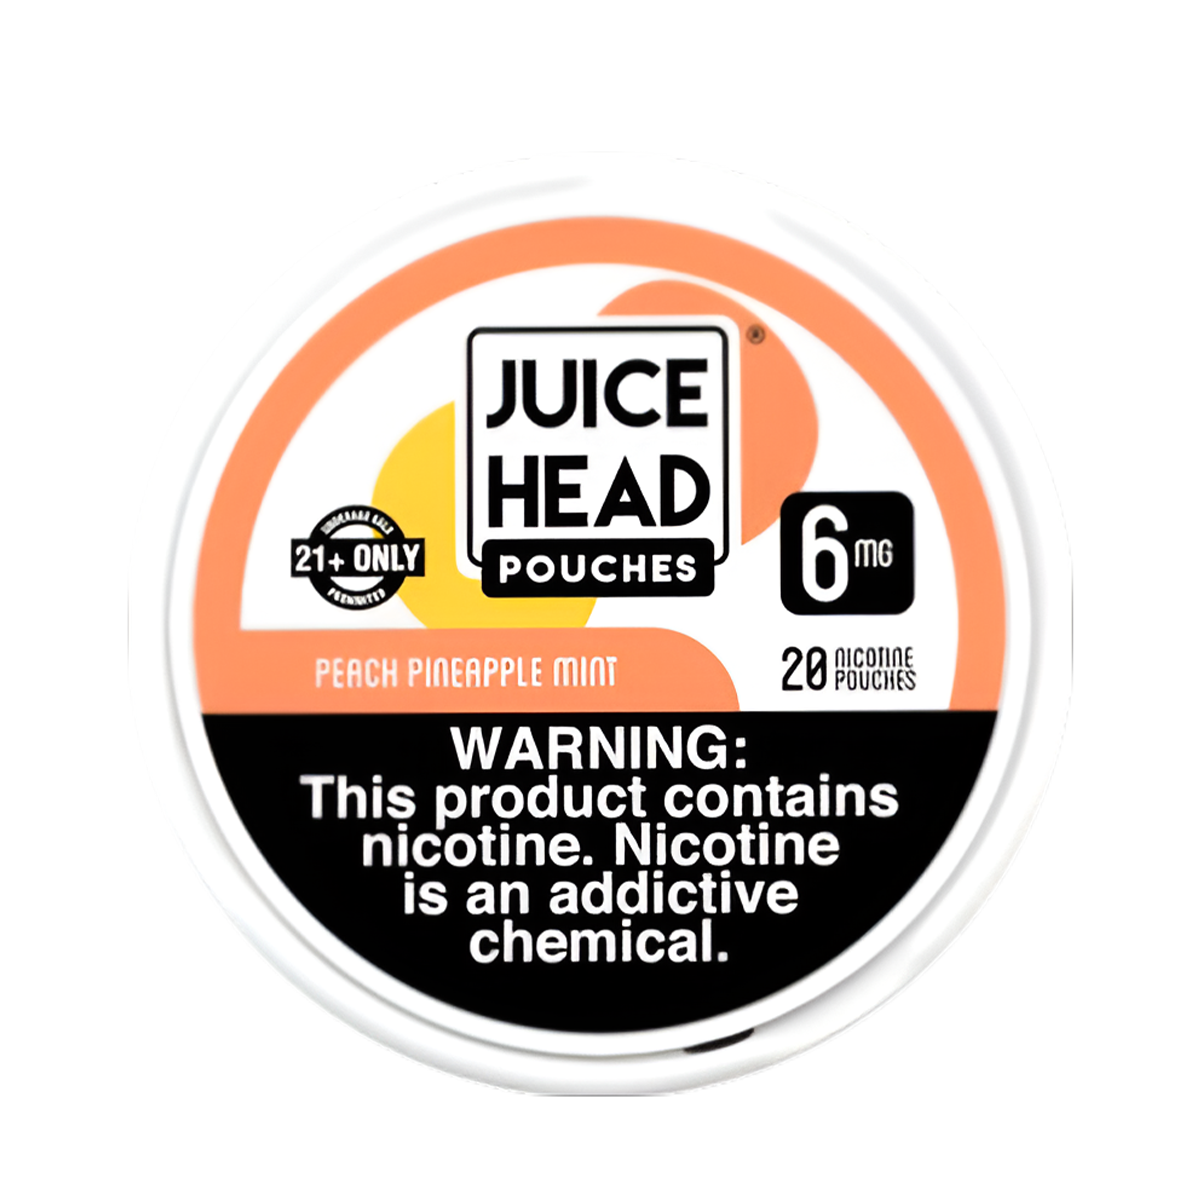 Juice Head Nicotine Pouches 6 Mg 20 Nicotine Punches Peach Pineapple Mint